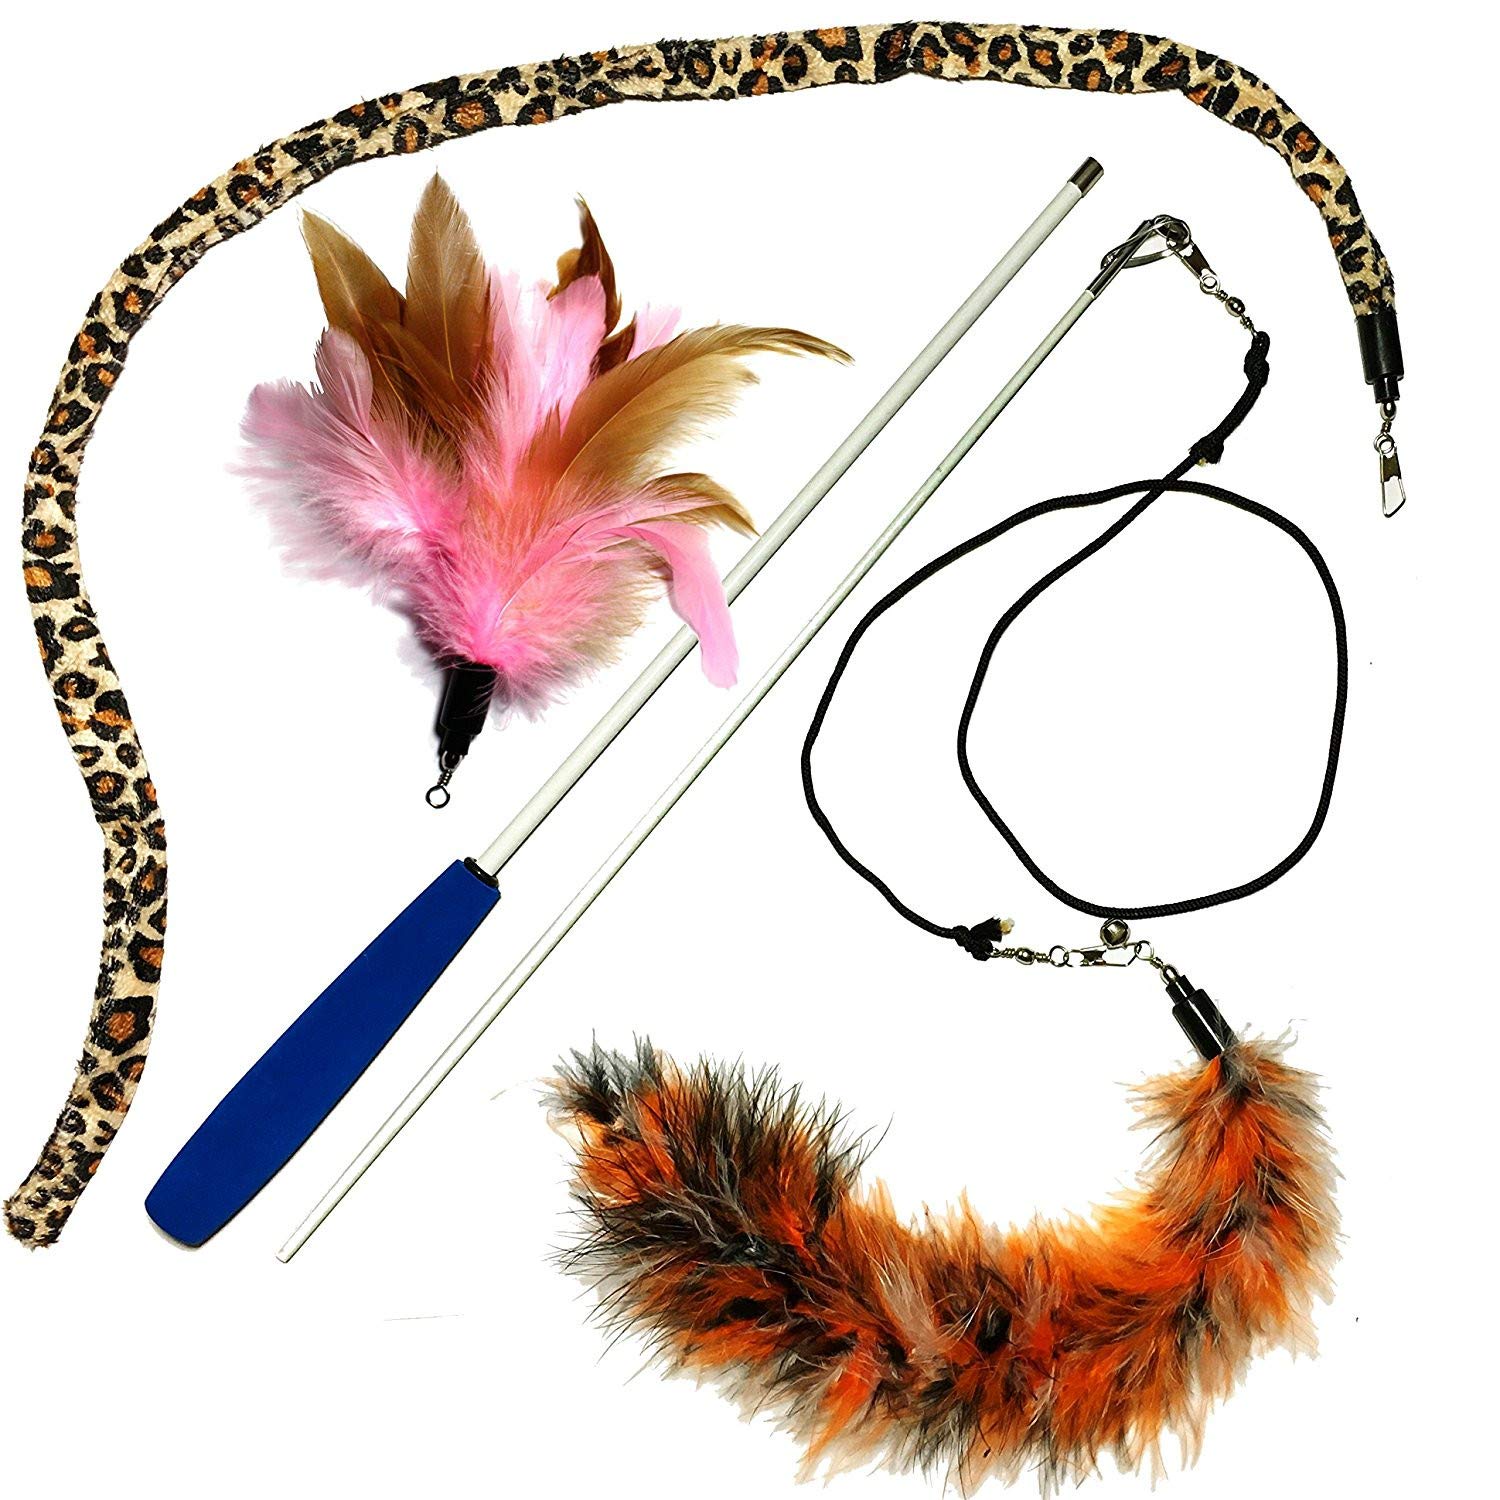 Feather Teaser and Exerciser with a Slithering Snake for Cat and Kitten